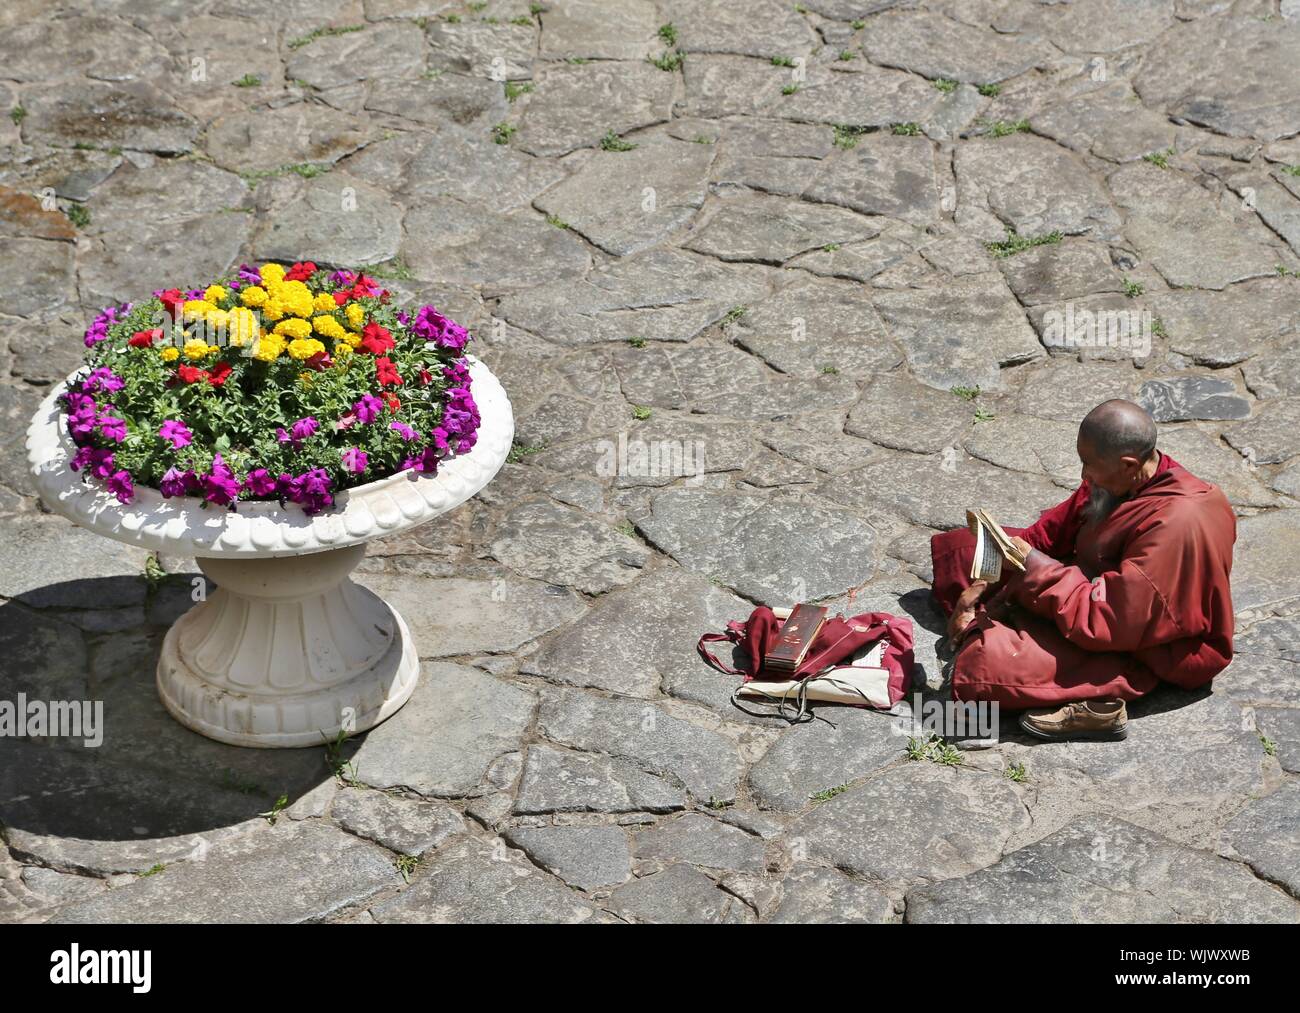 High Angle View Of Monk Reading Religious Book By Flower Vase Stock Photo